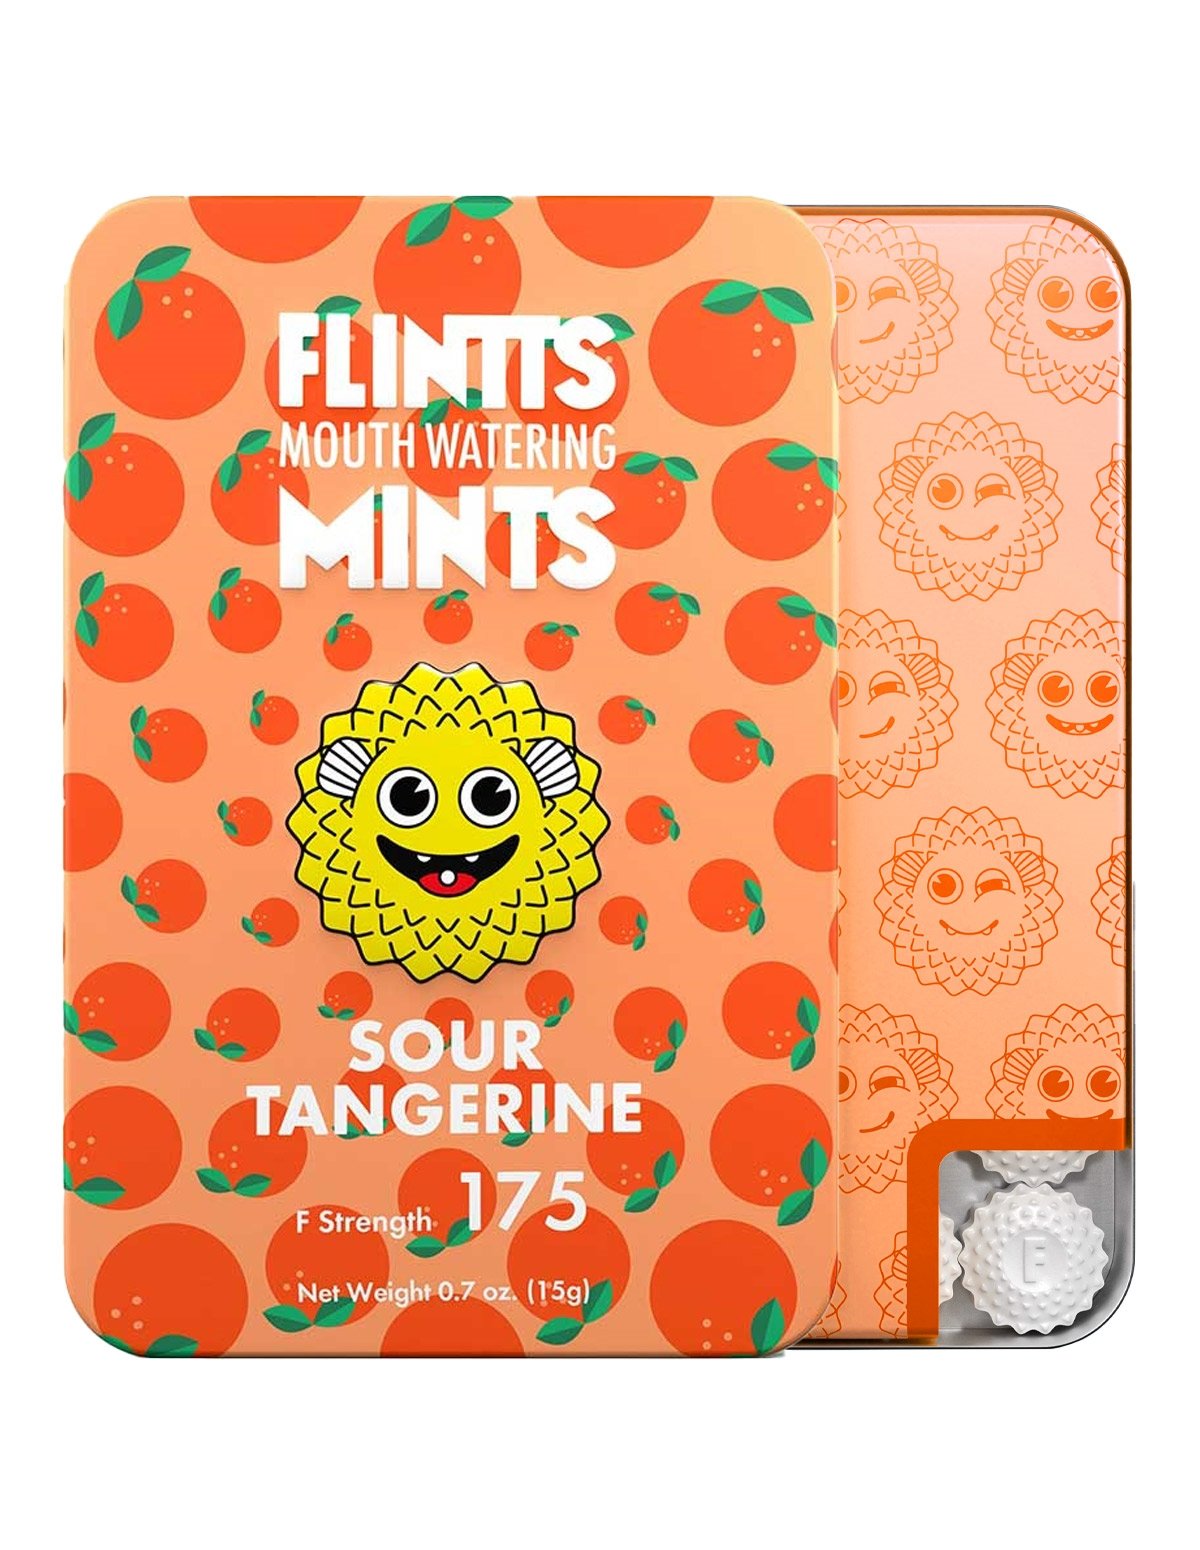 alternate image for Flintts Mints Mouth Watering - Sour Tangerine Strength 175